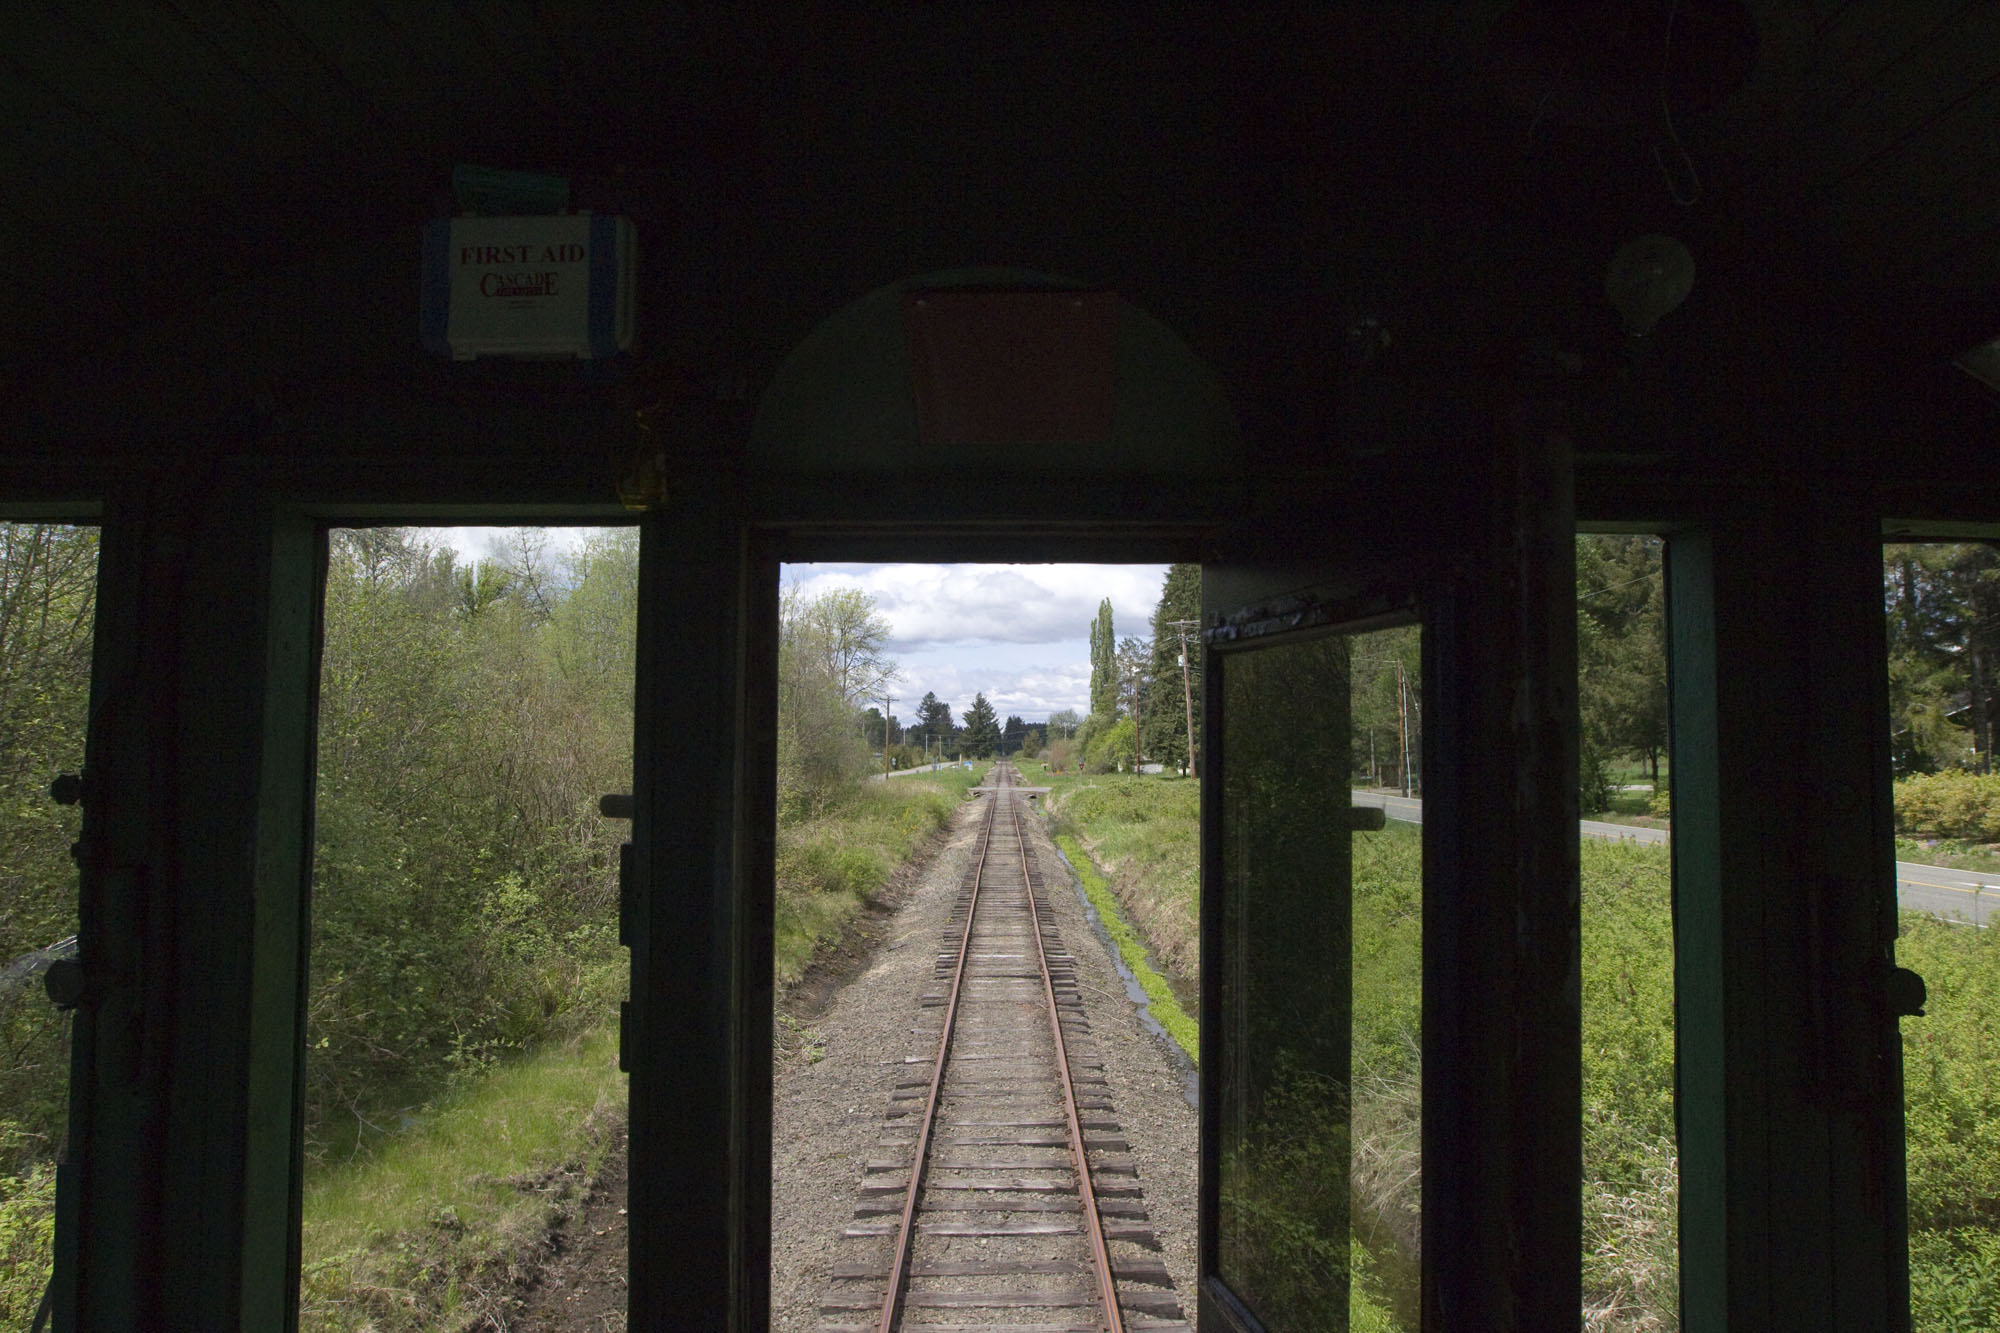 A view from the engine on the Chelatchie Prairie Railroad train in Yacolt in May 2014.